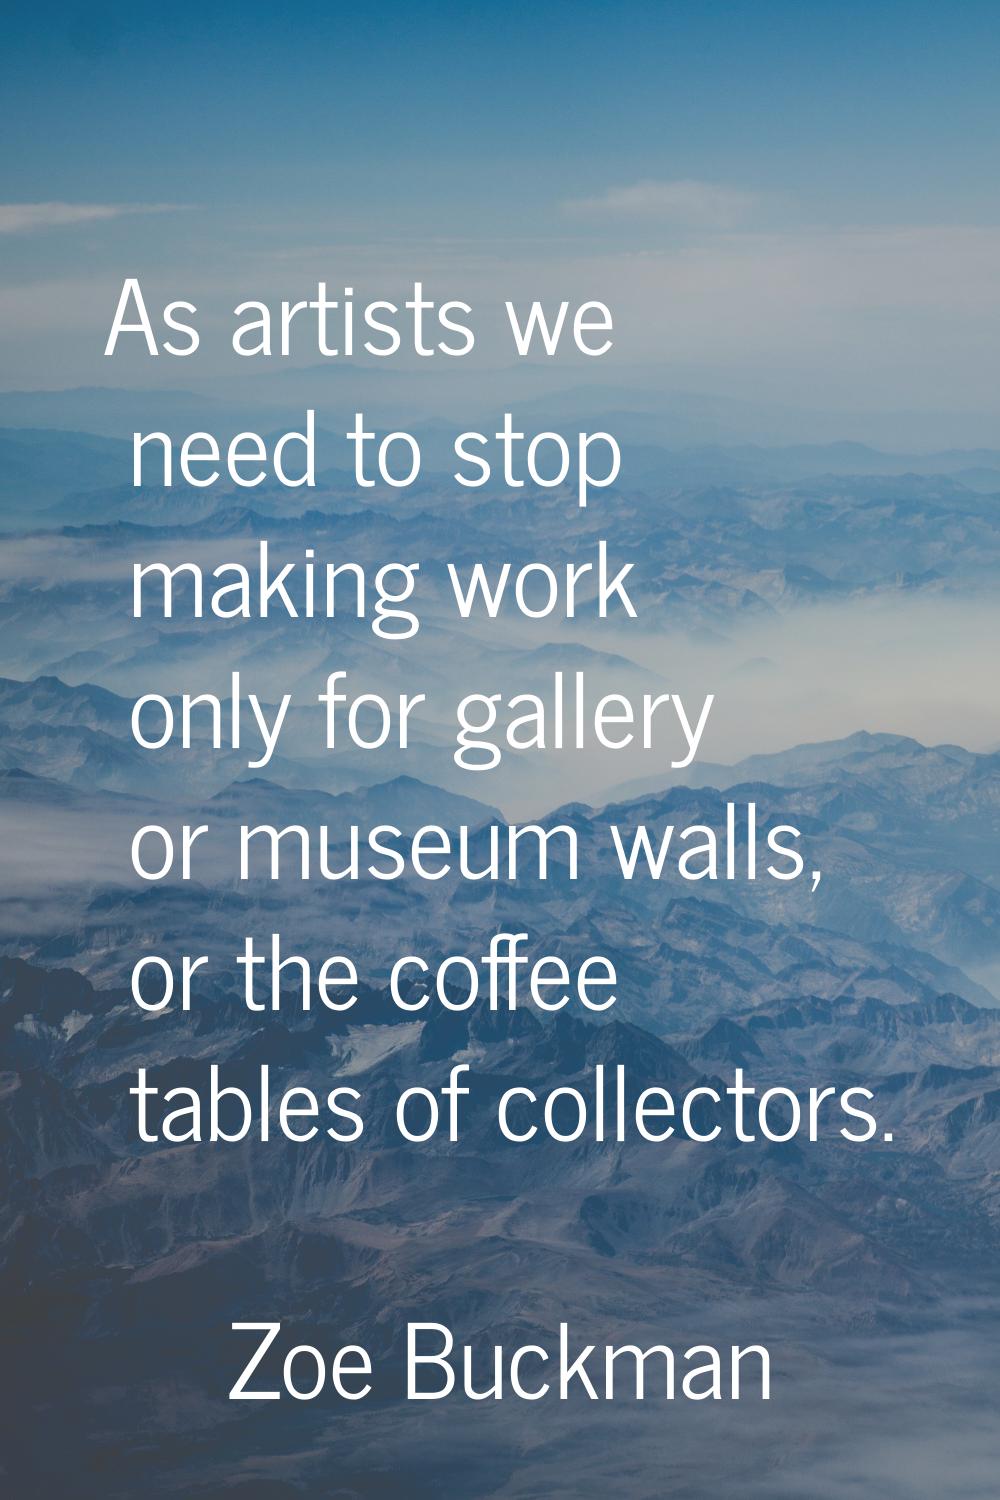 As artists we need to stop making work only for gallery or museum walls, or the coffee tables of co